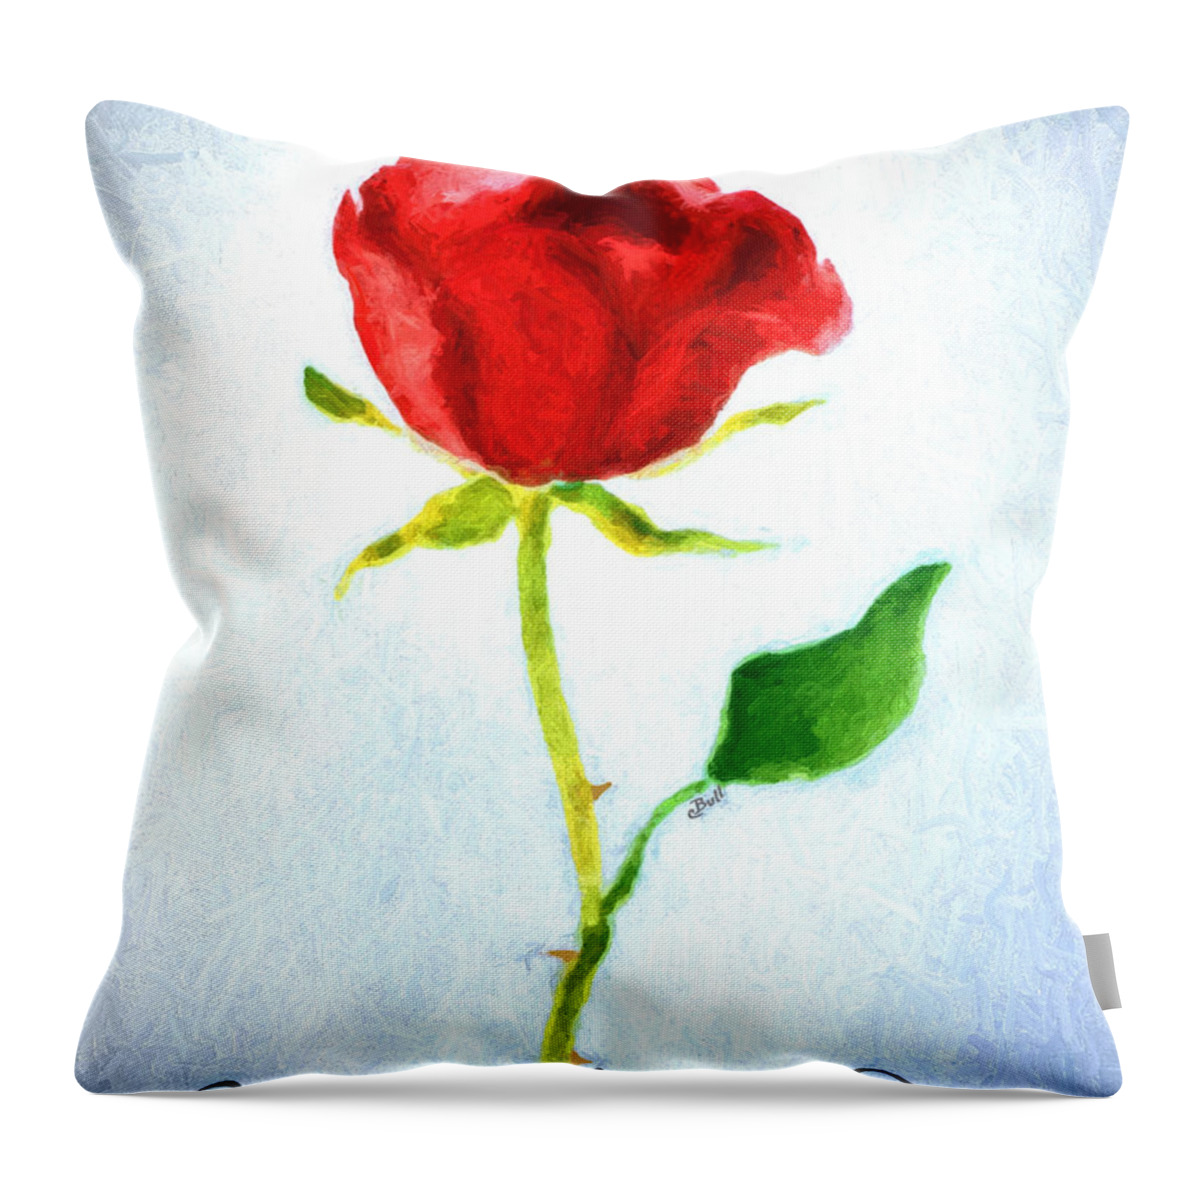 Rose Throw Pillow featuring the painting Valentine's Day Rose by Claire Bull